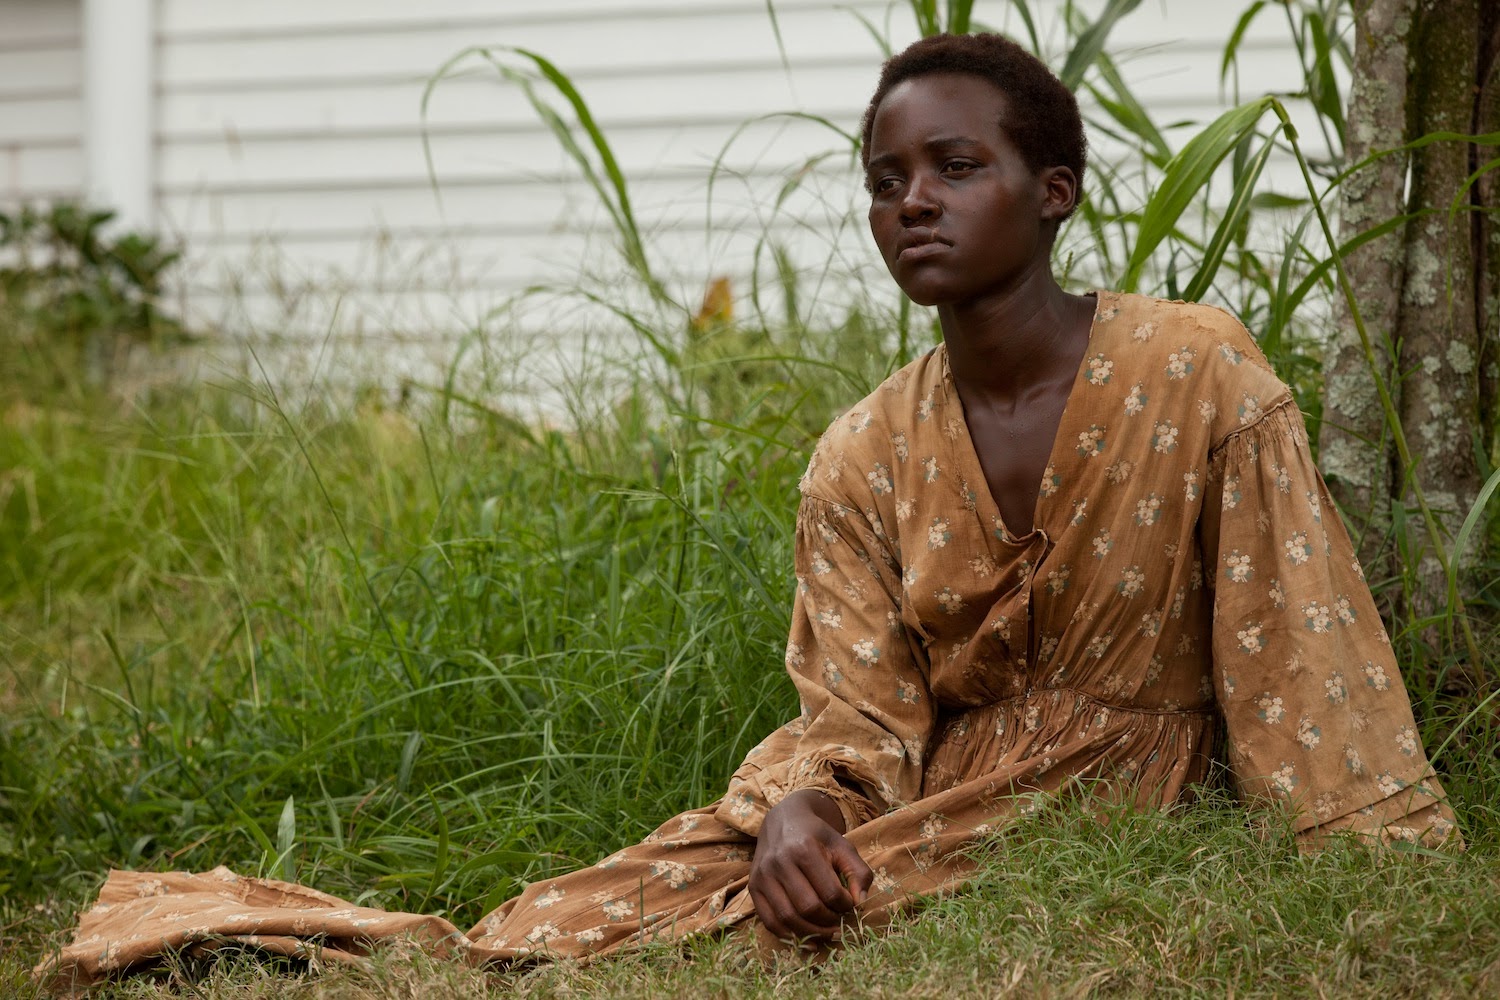 lupita Nyongo in 12 years a salve the trent